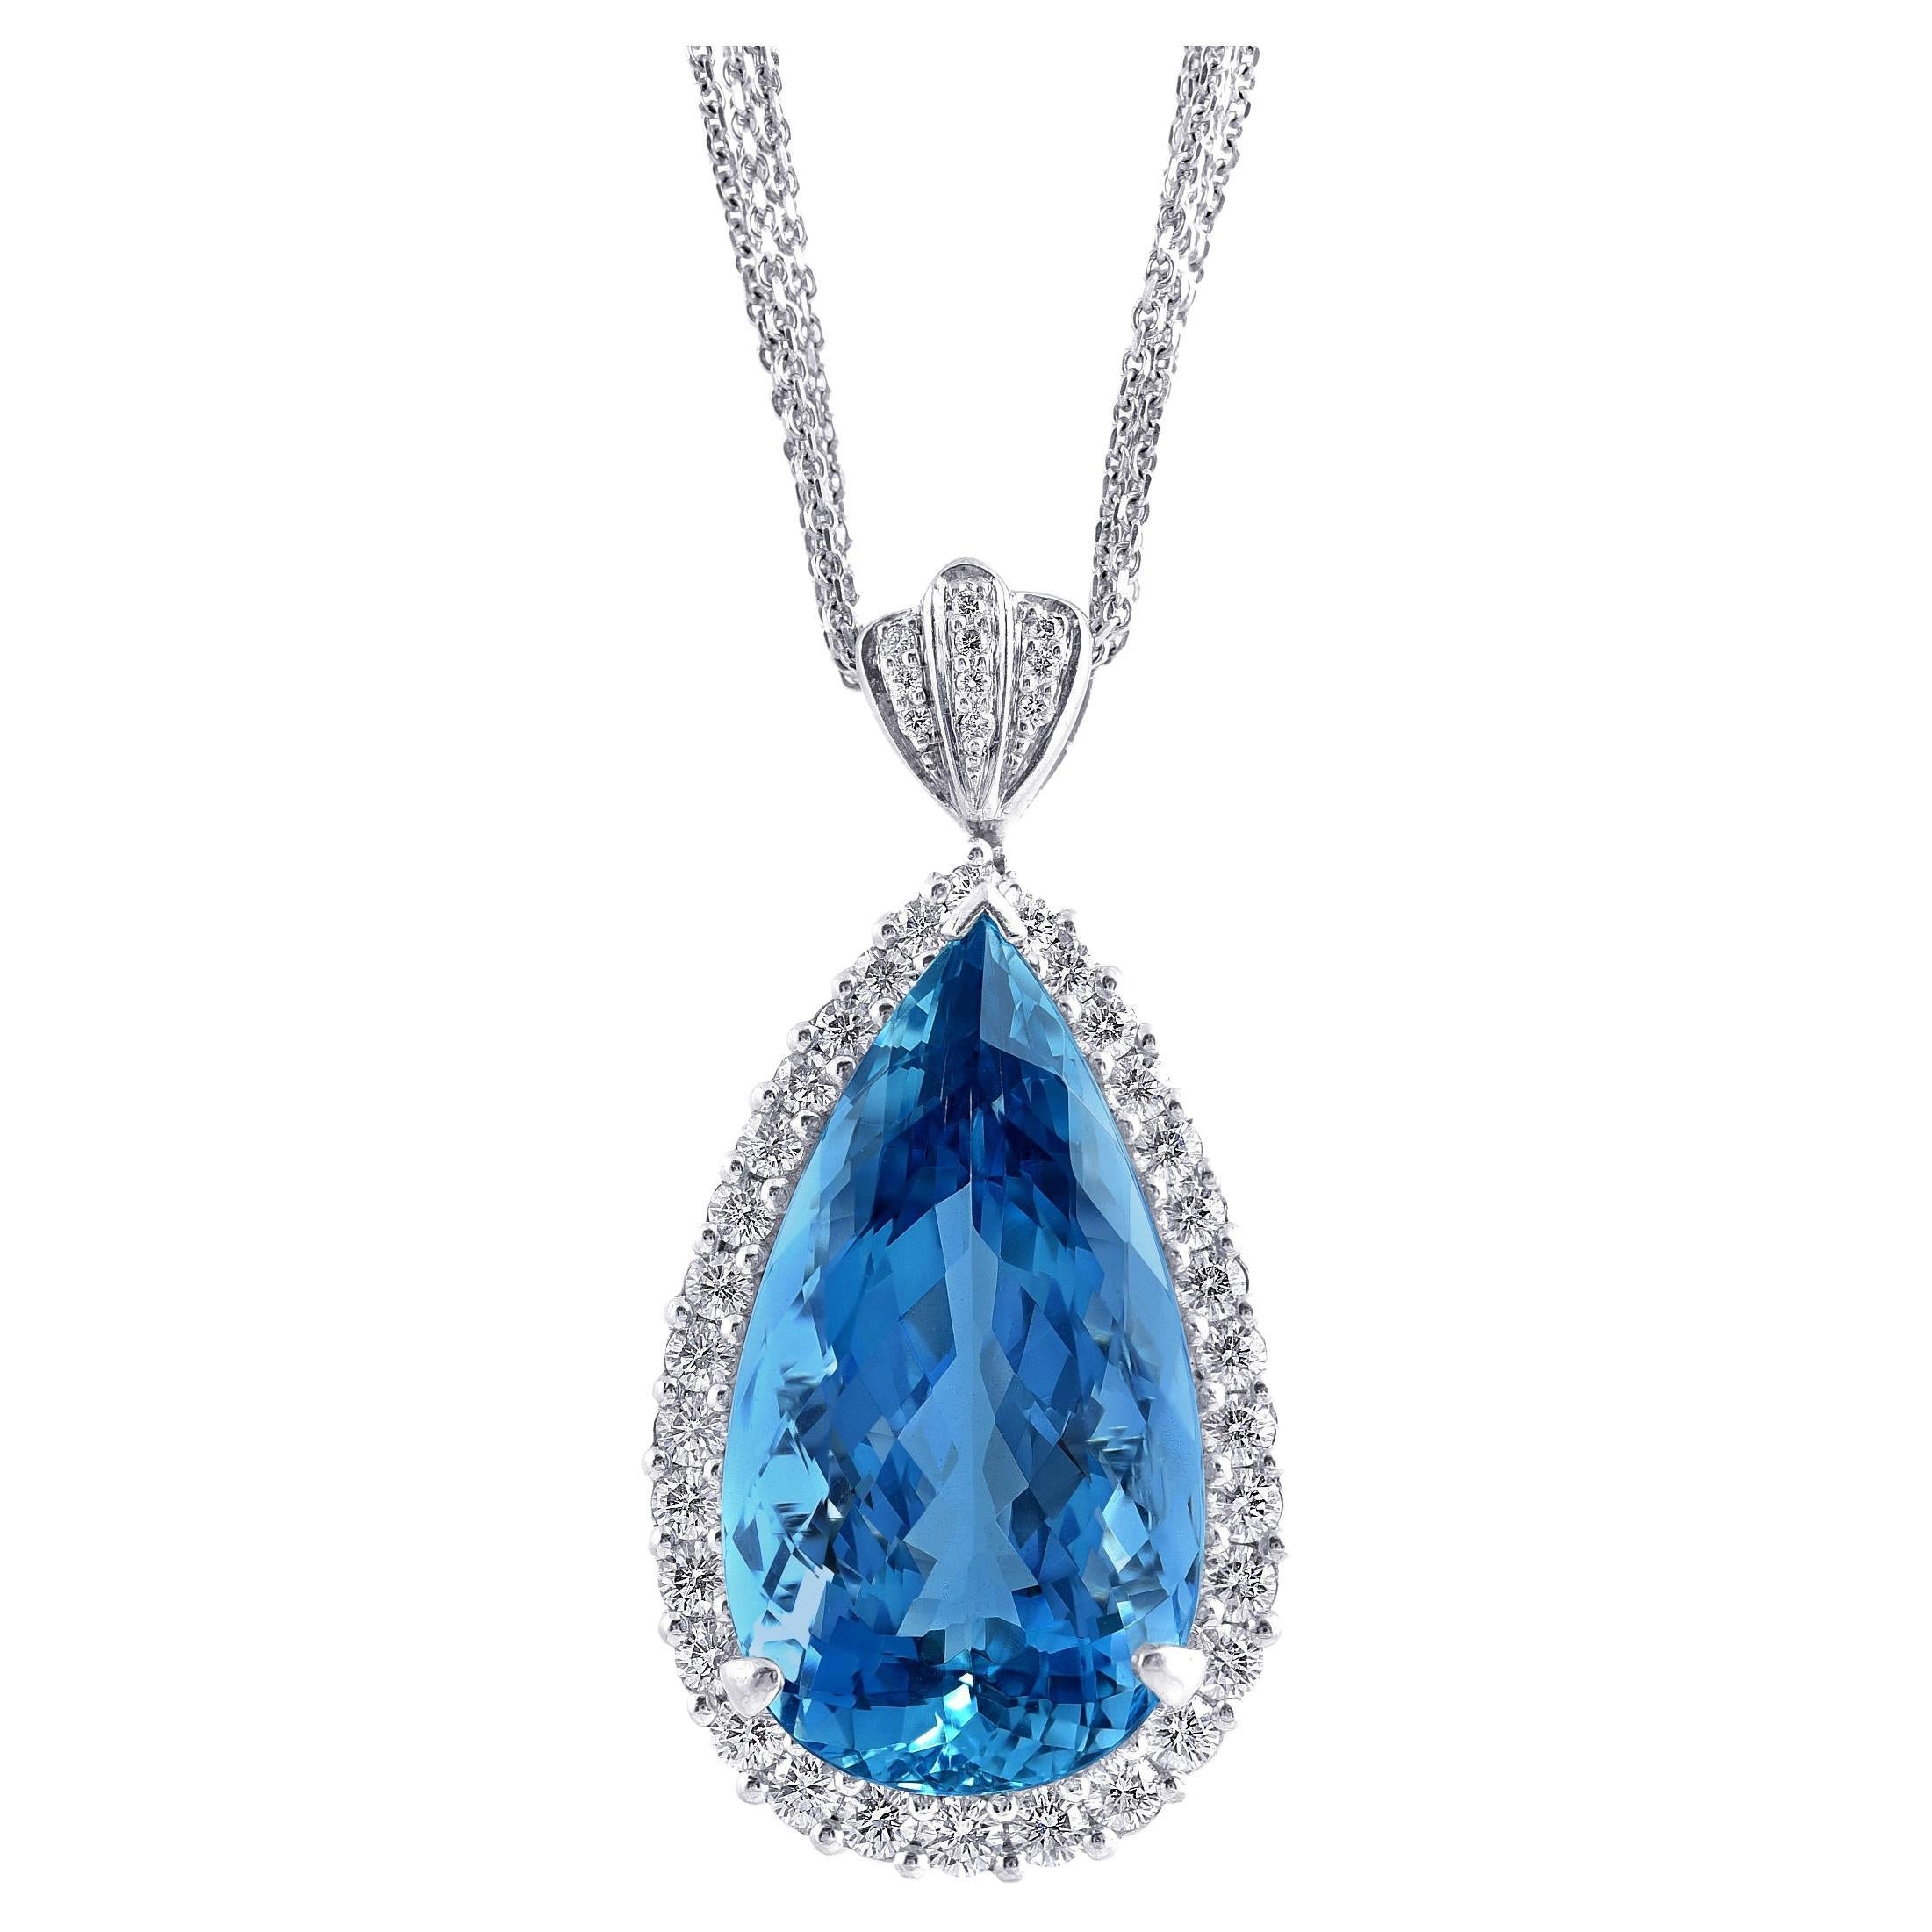 GIA Certified Natural Aquamarine 25.39 Ct in Platinum Pendant with 14KWG Chain